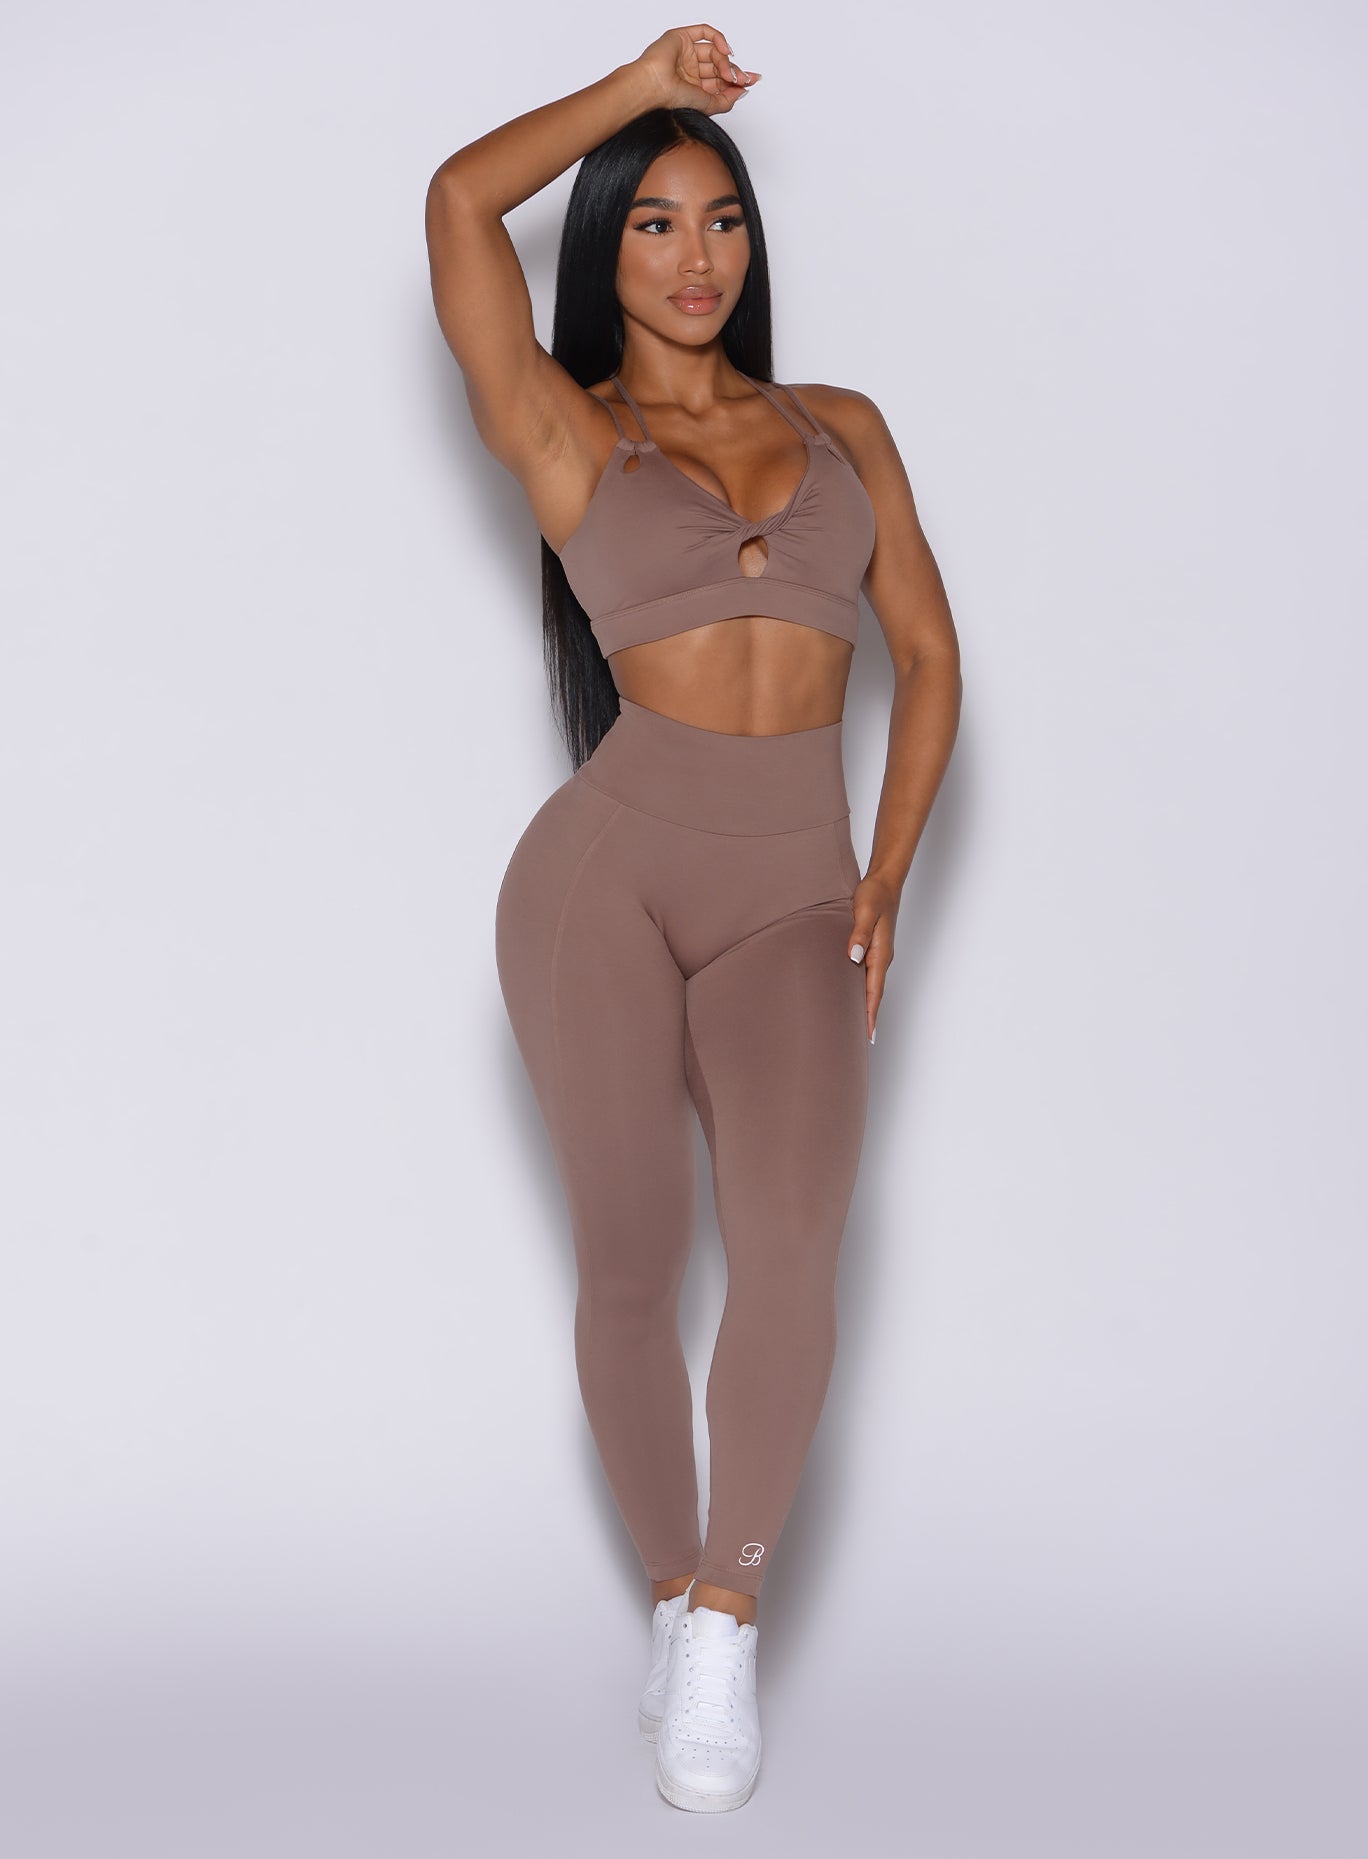 Front profile view of a model with her right hand over her head wearing our new and enhanced shape leggings in tan color and a matching bra